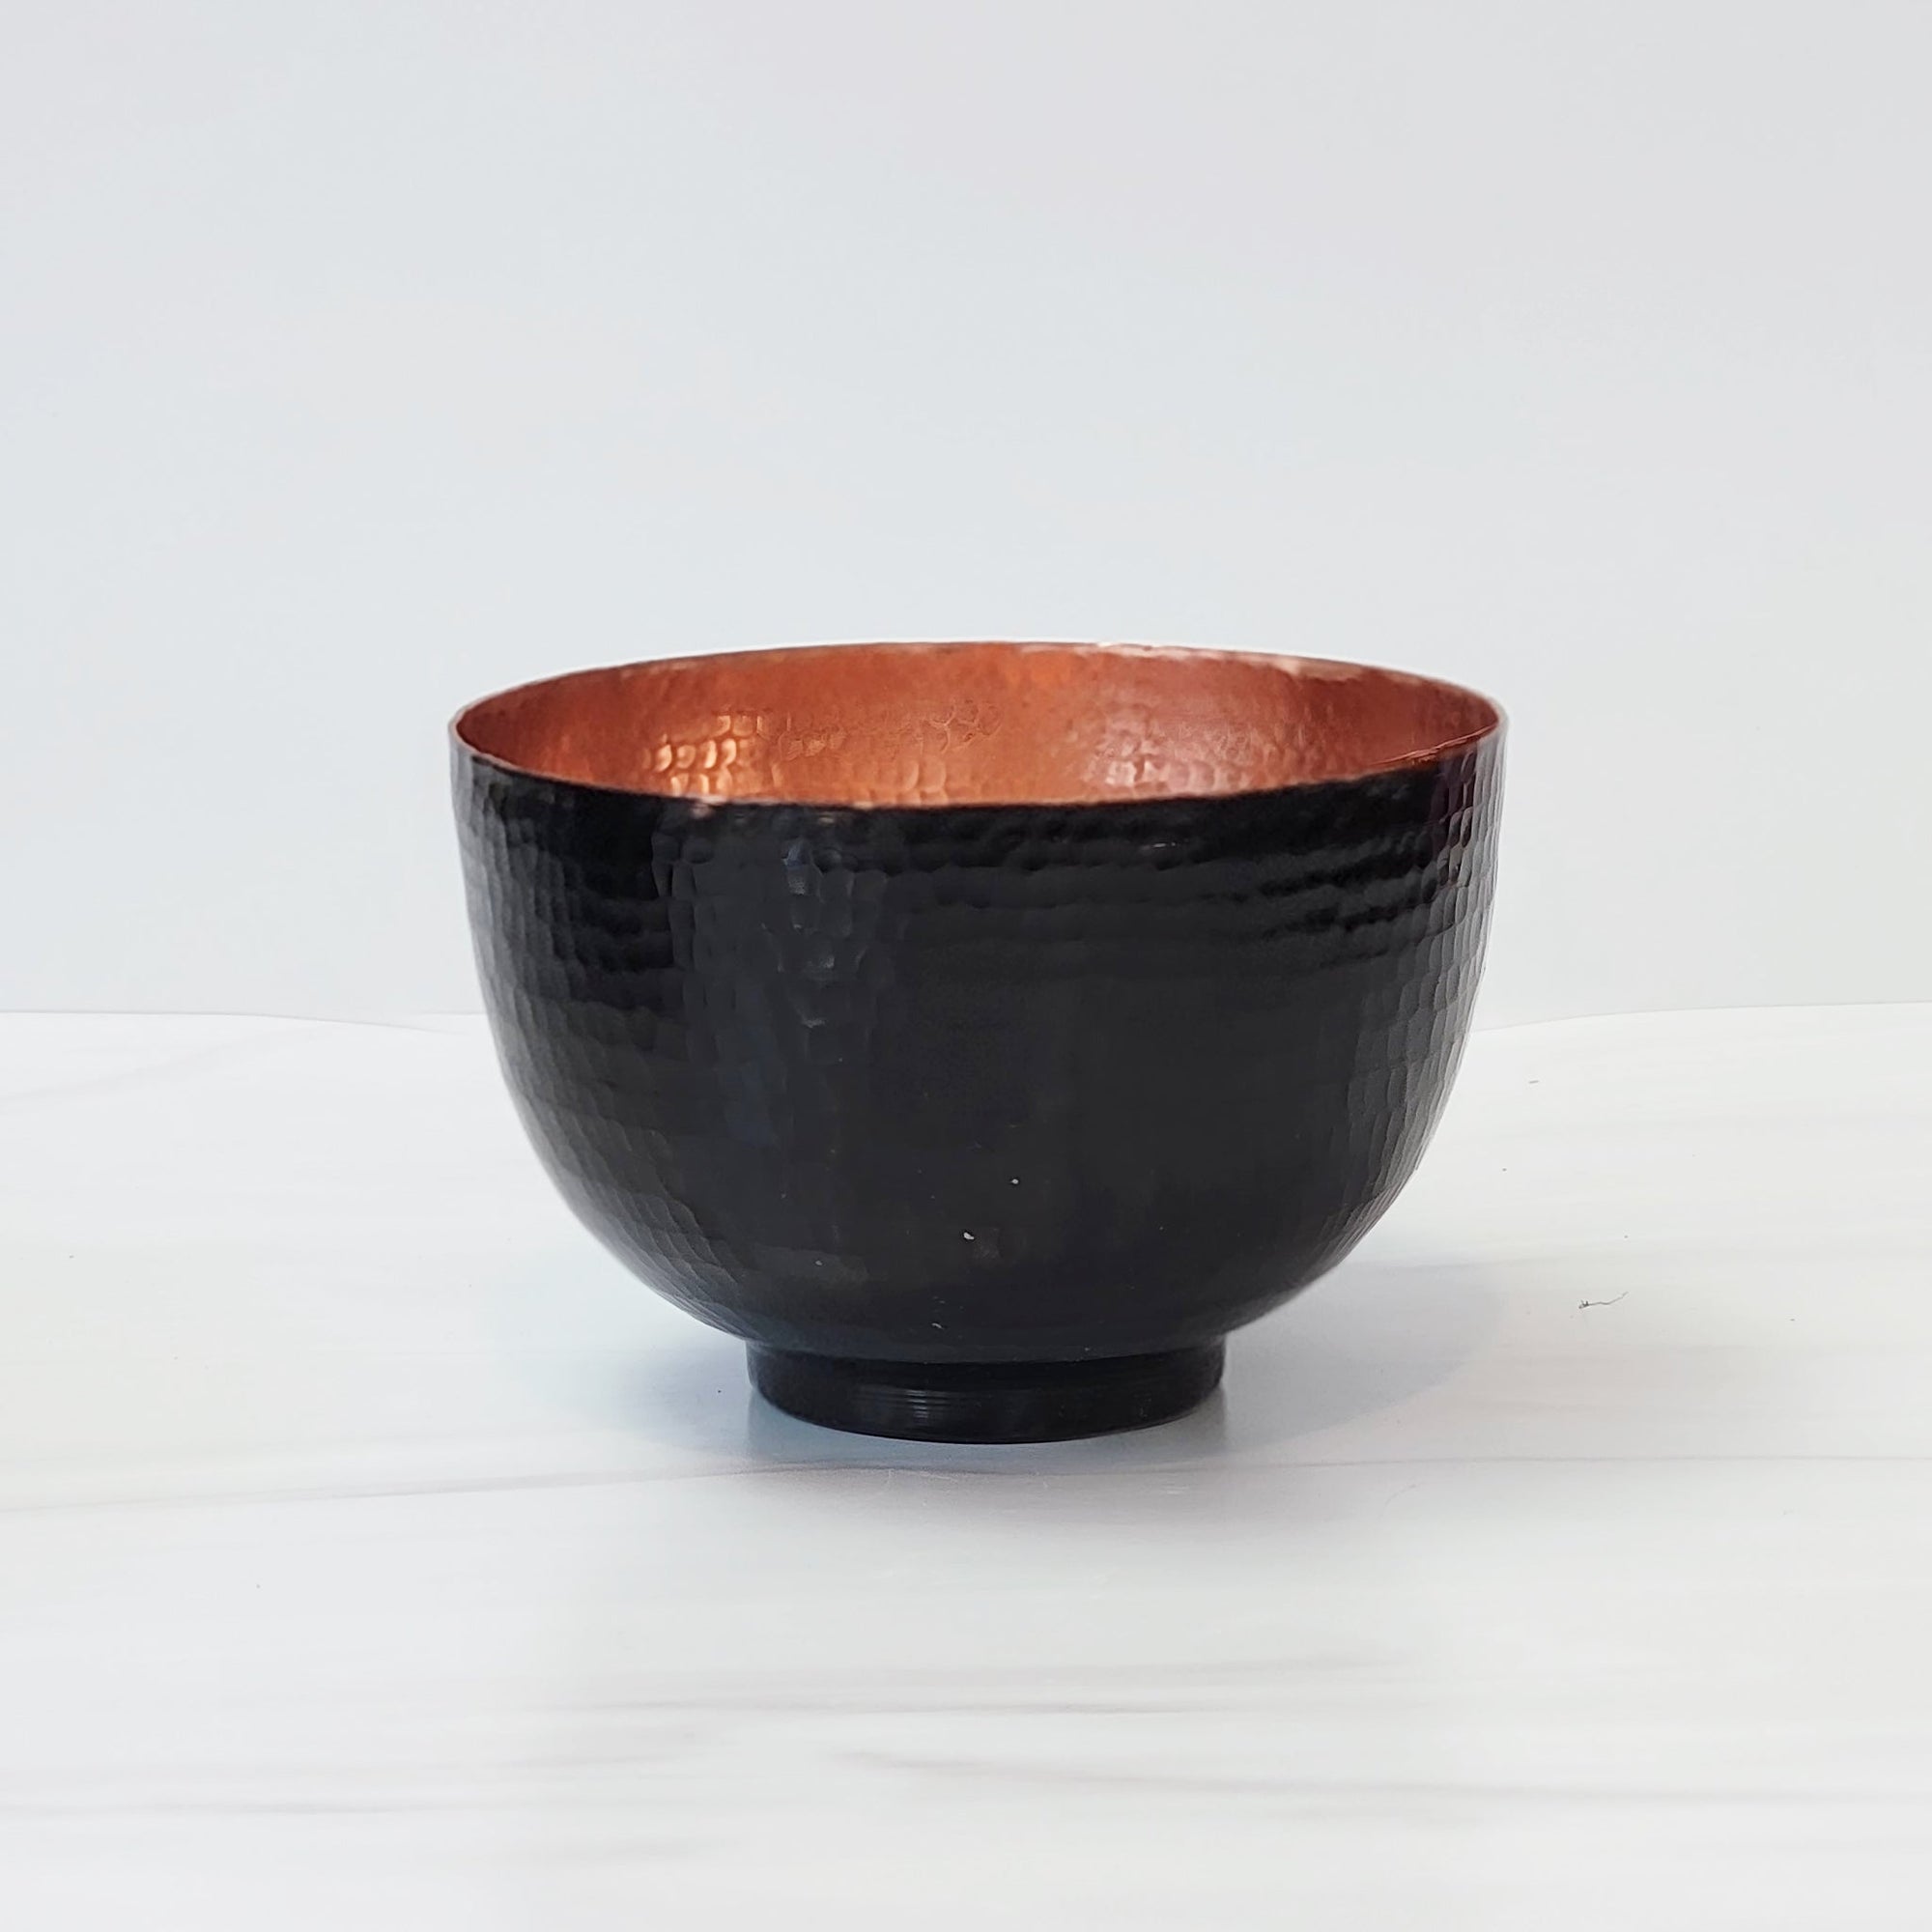 Lacquered and blackened hammered copper bowls